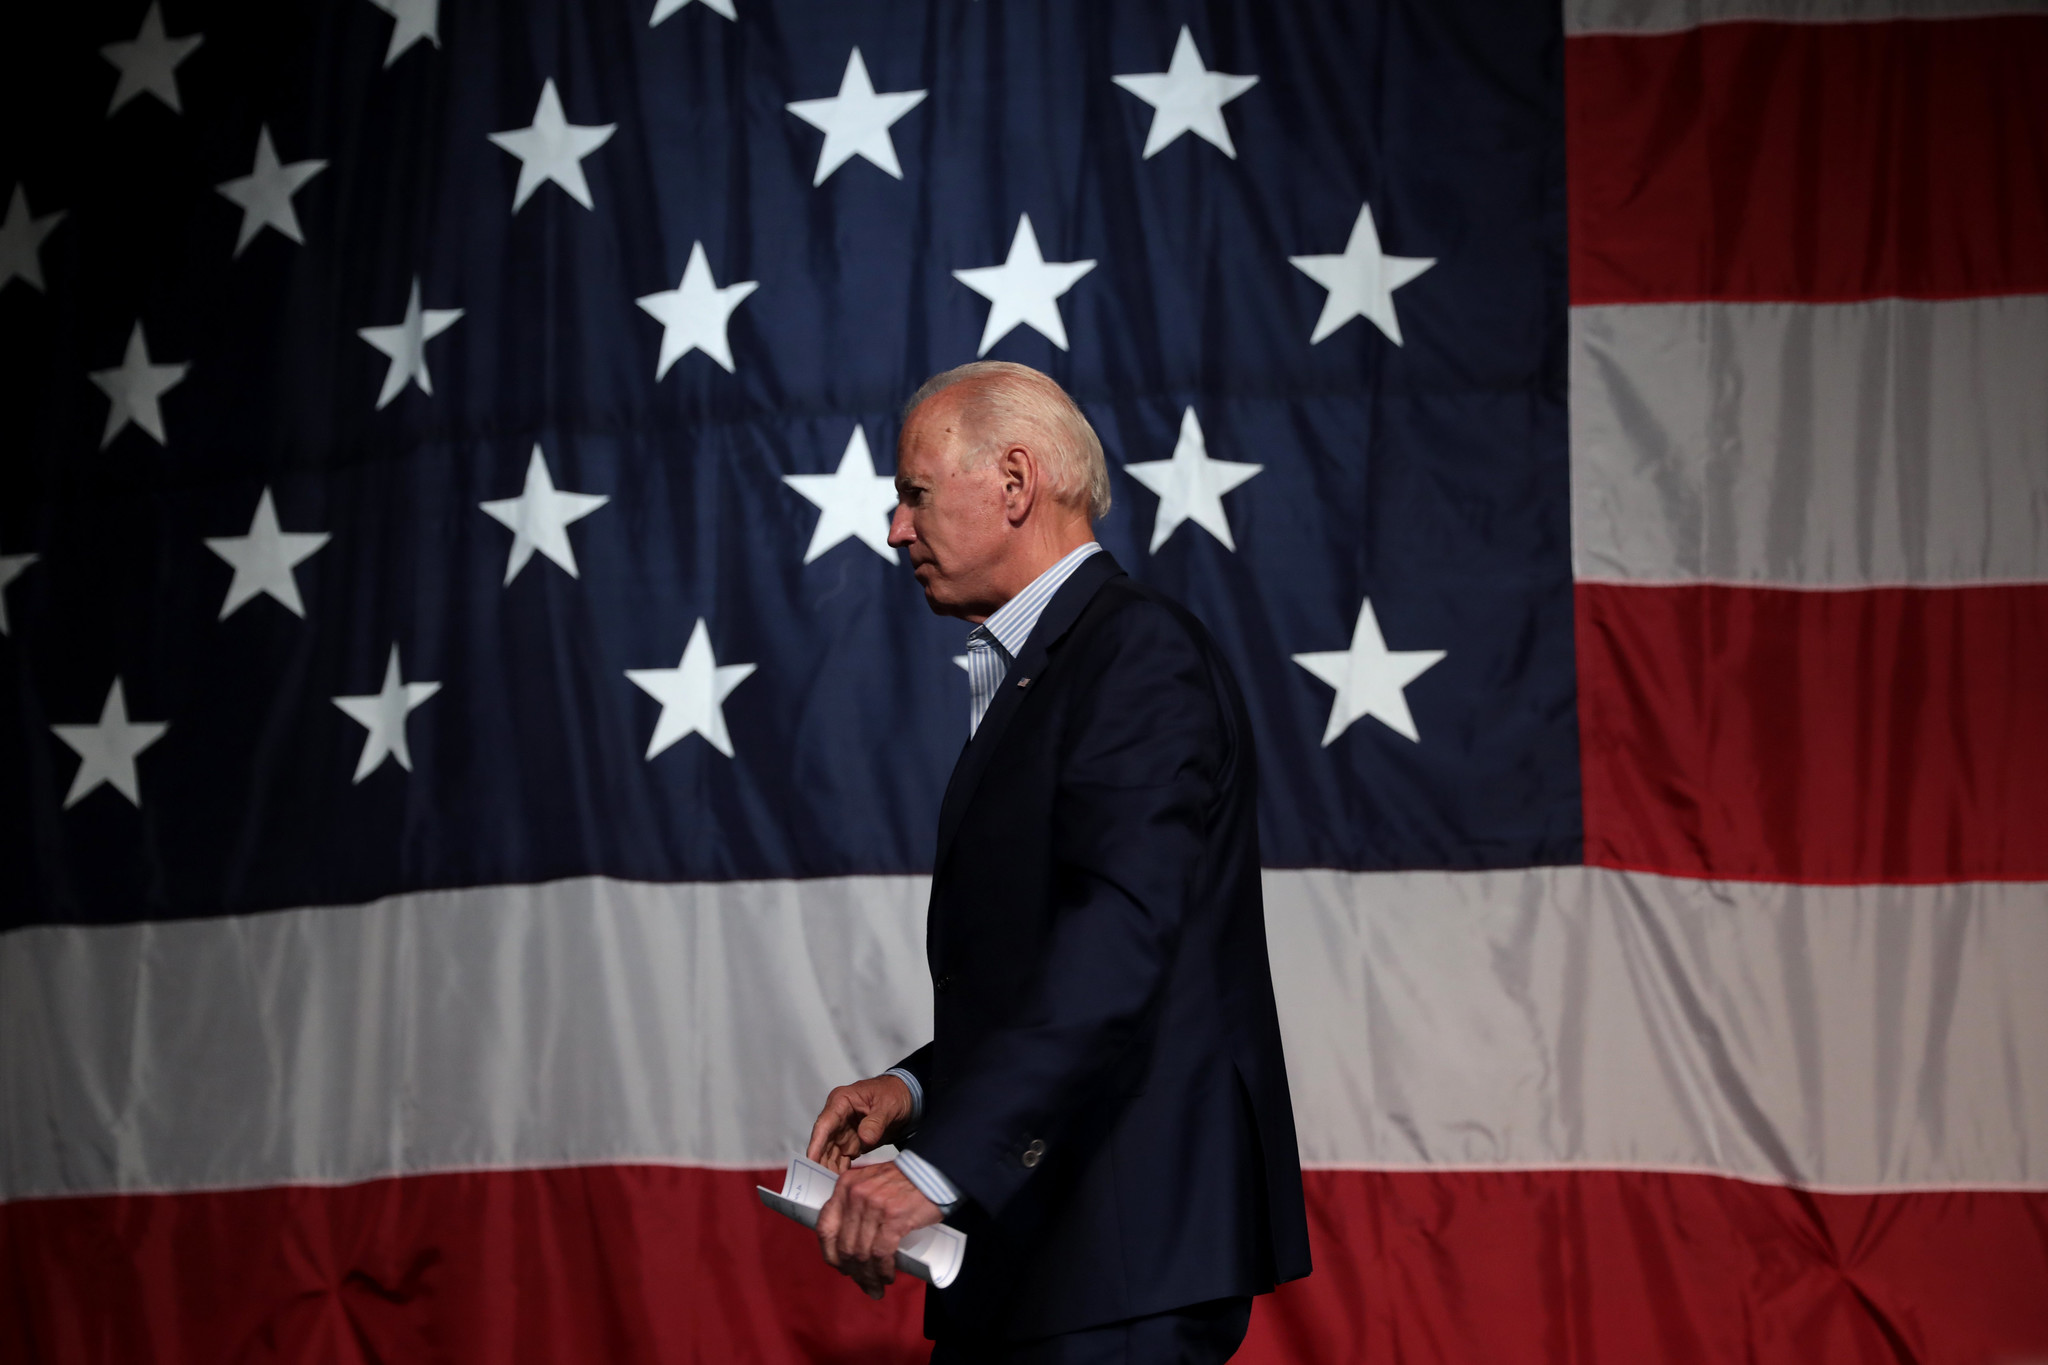 Can Biden revive his presidential chances for 2024?